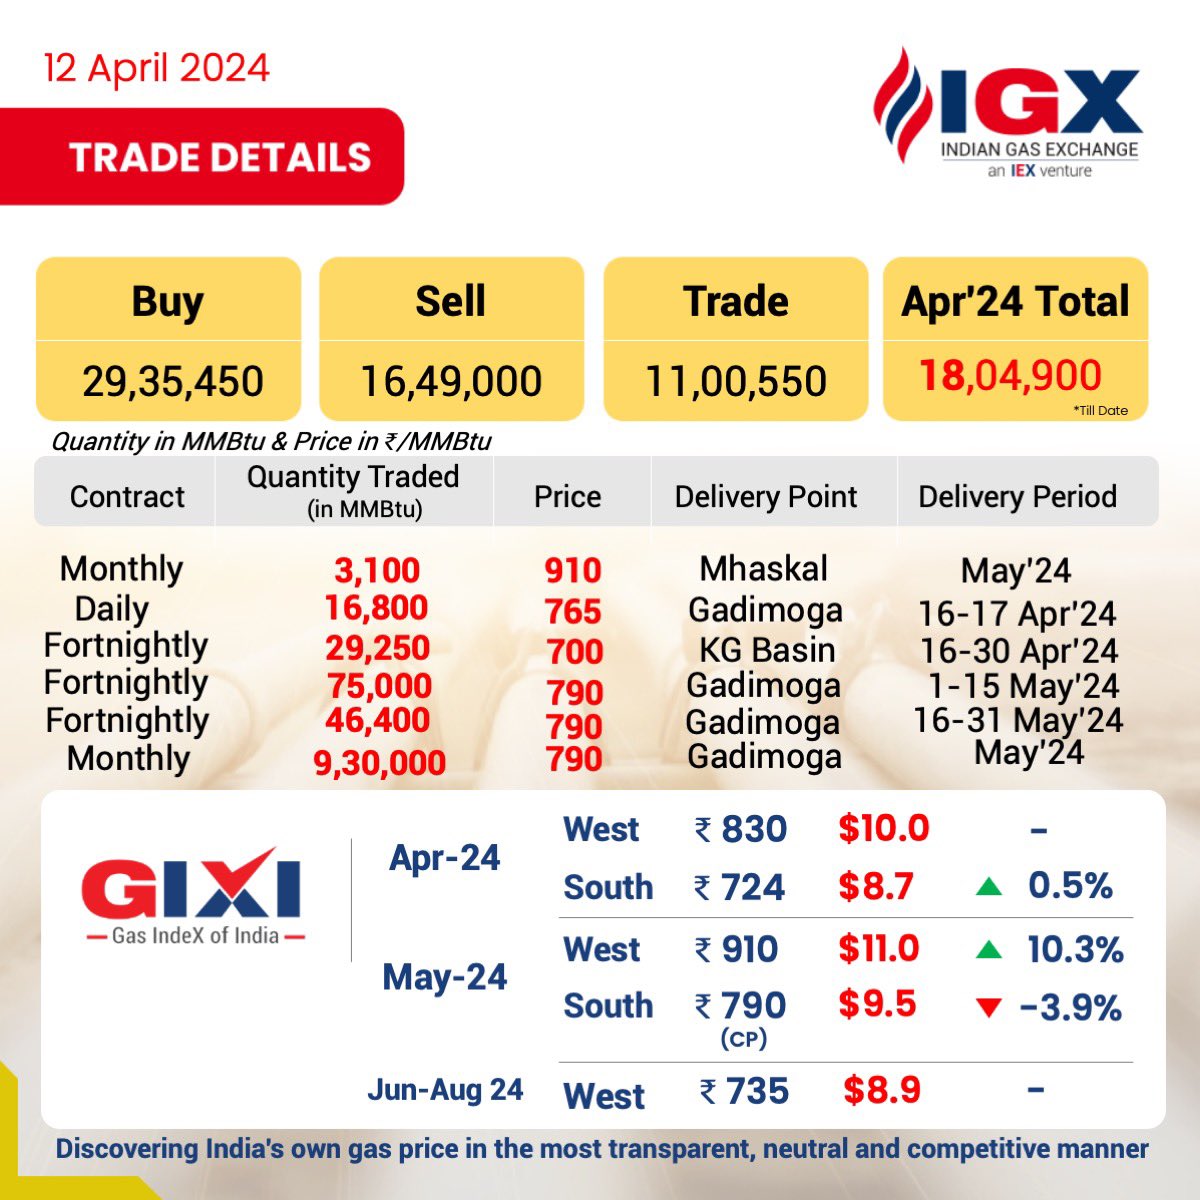 IGX trades 11,00,550 MMBTu quantity at multiple delivery points, with delivery scheduled for 16 April '24-31 May '24
#IGXIndia #GasMarkets #LNG #IGX